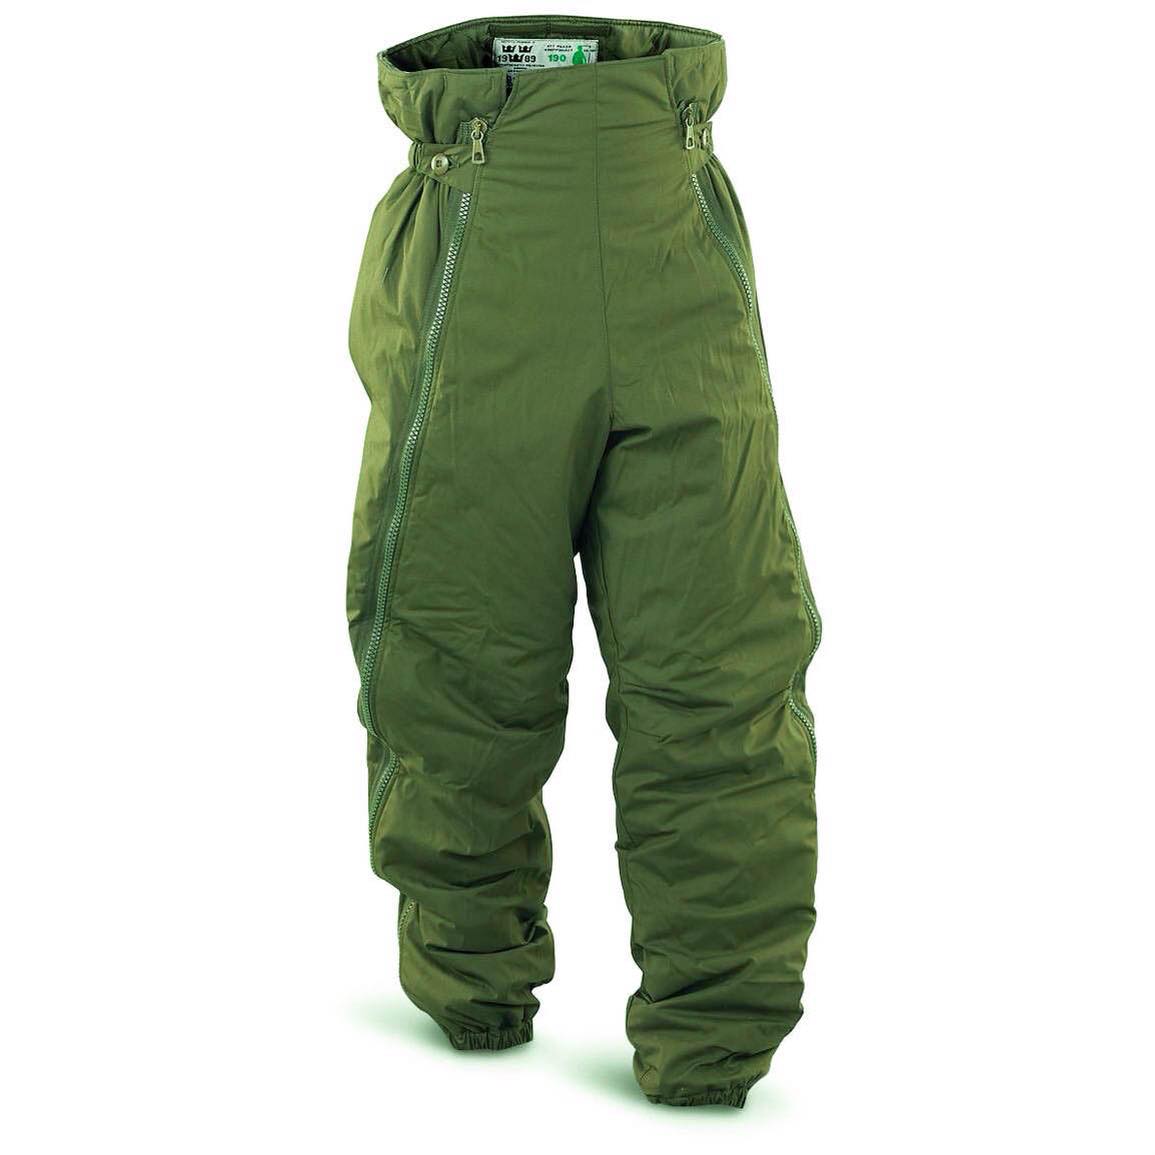 Swedish ECWS (Extreme Cold Weather System) M90 Thermal Trousers